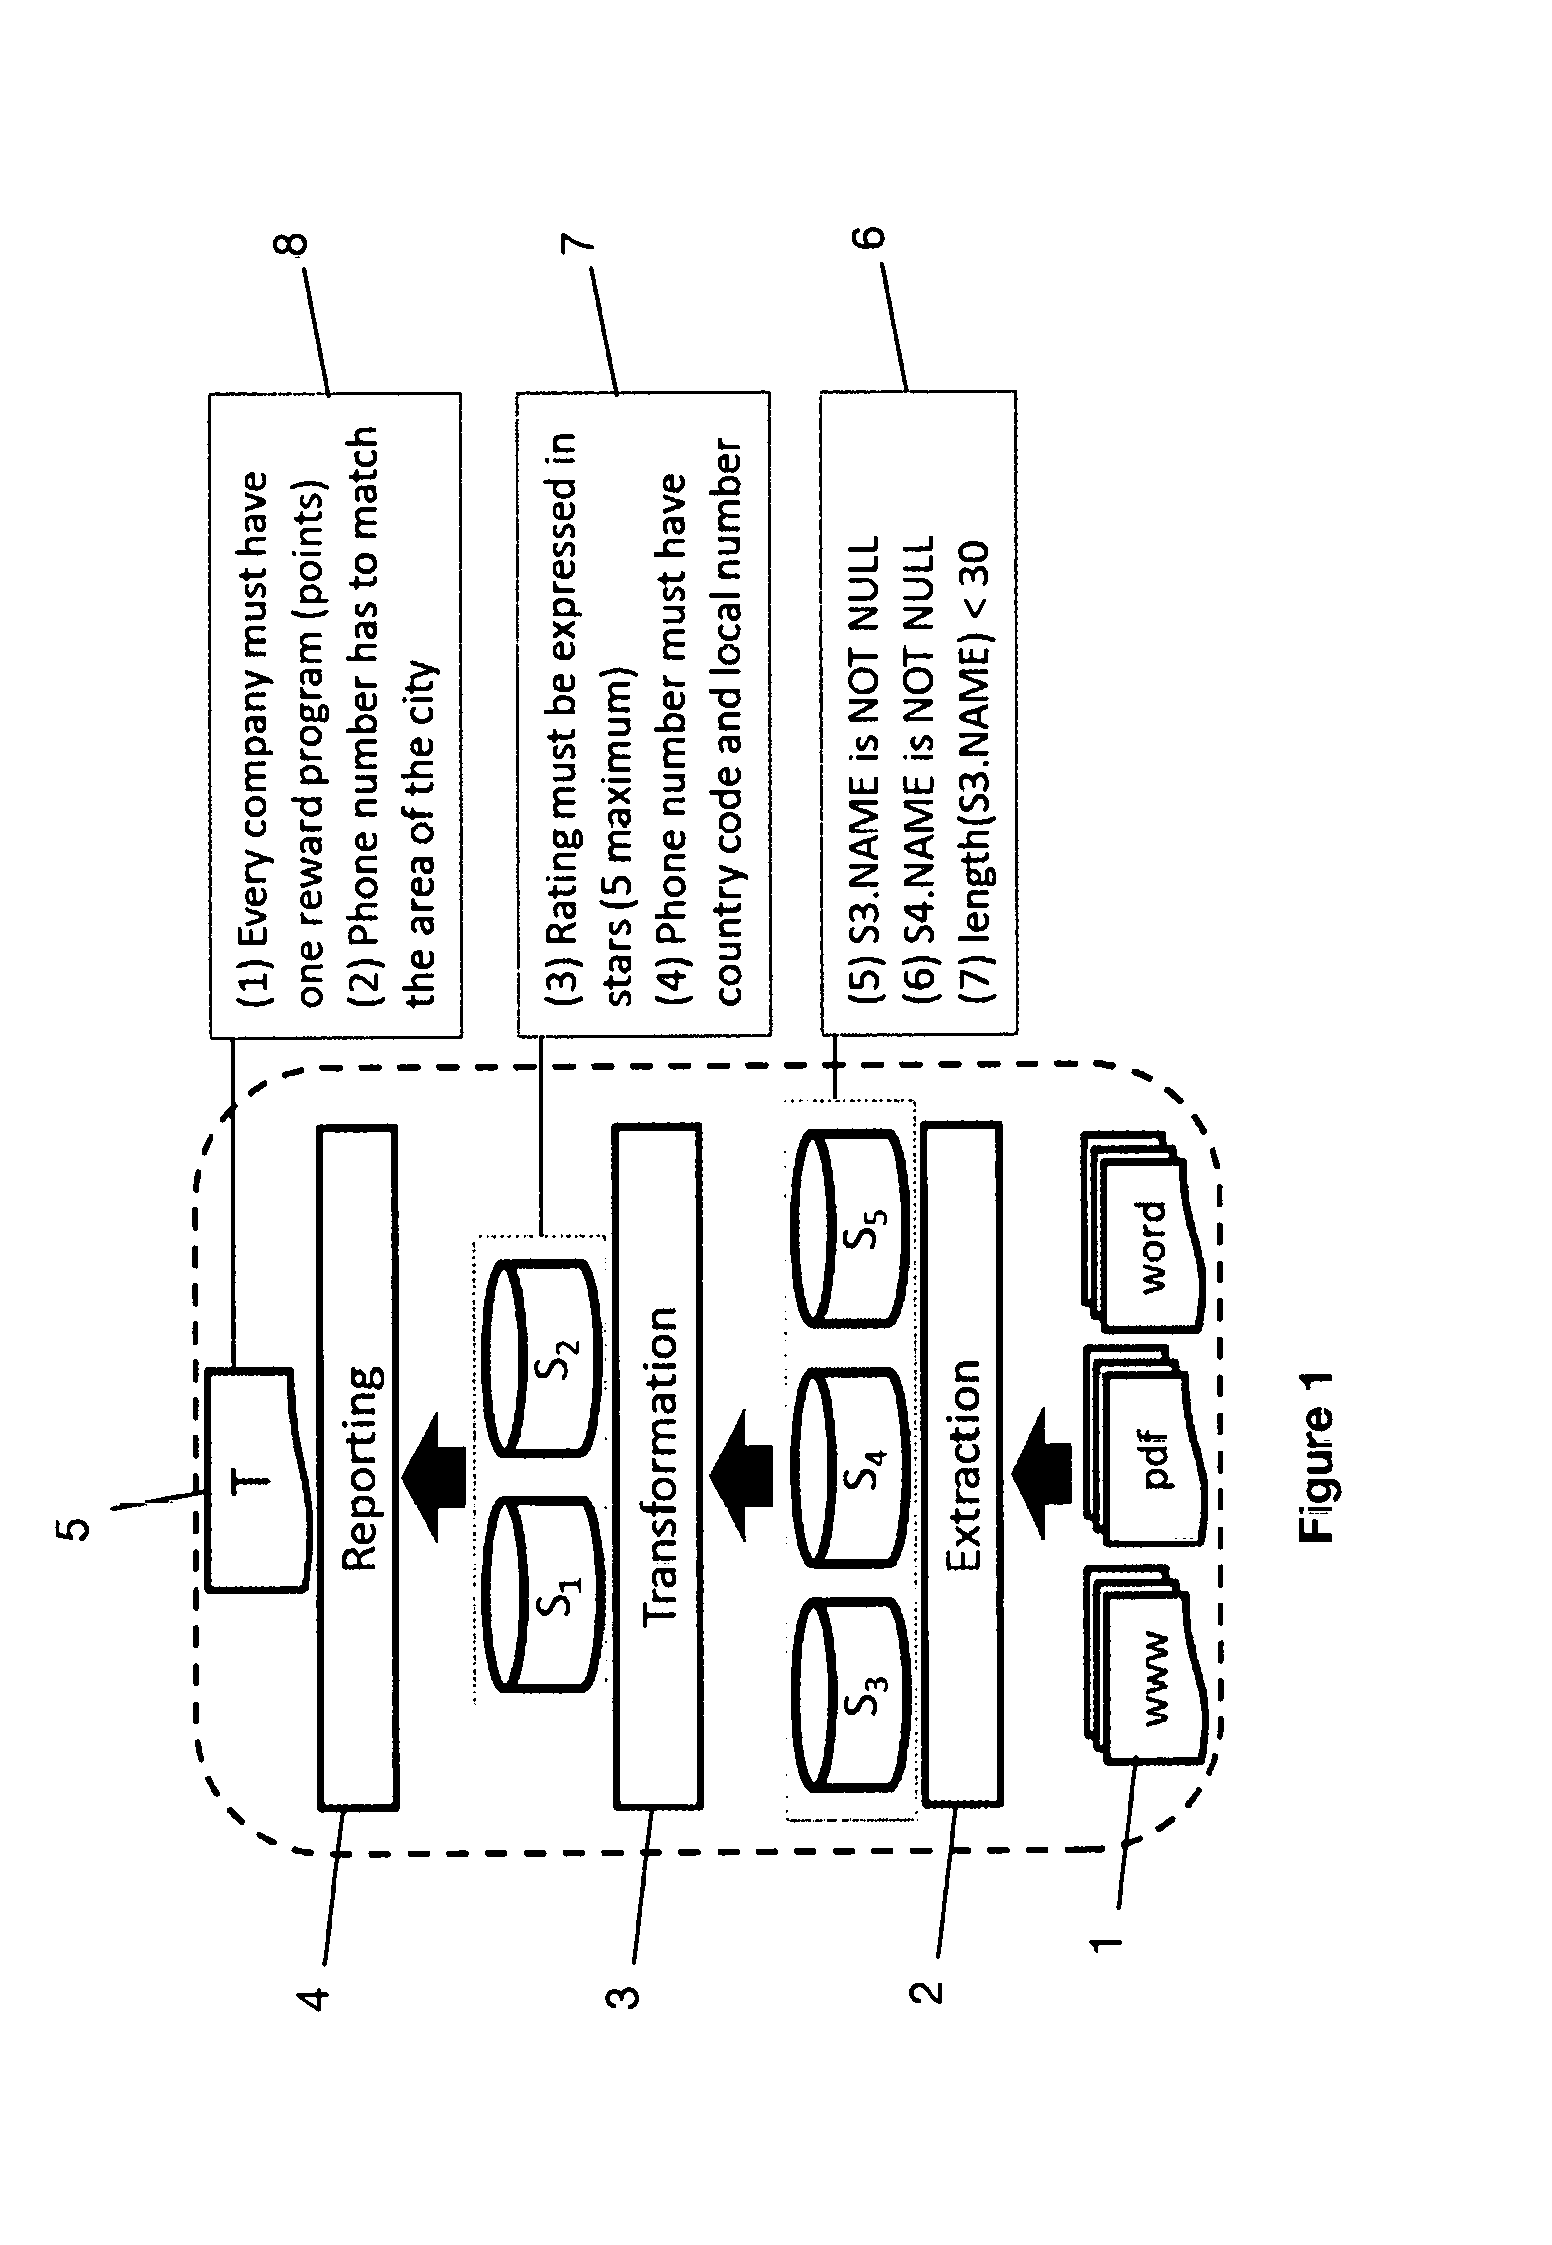 System and method for checking data for errors